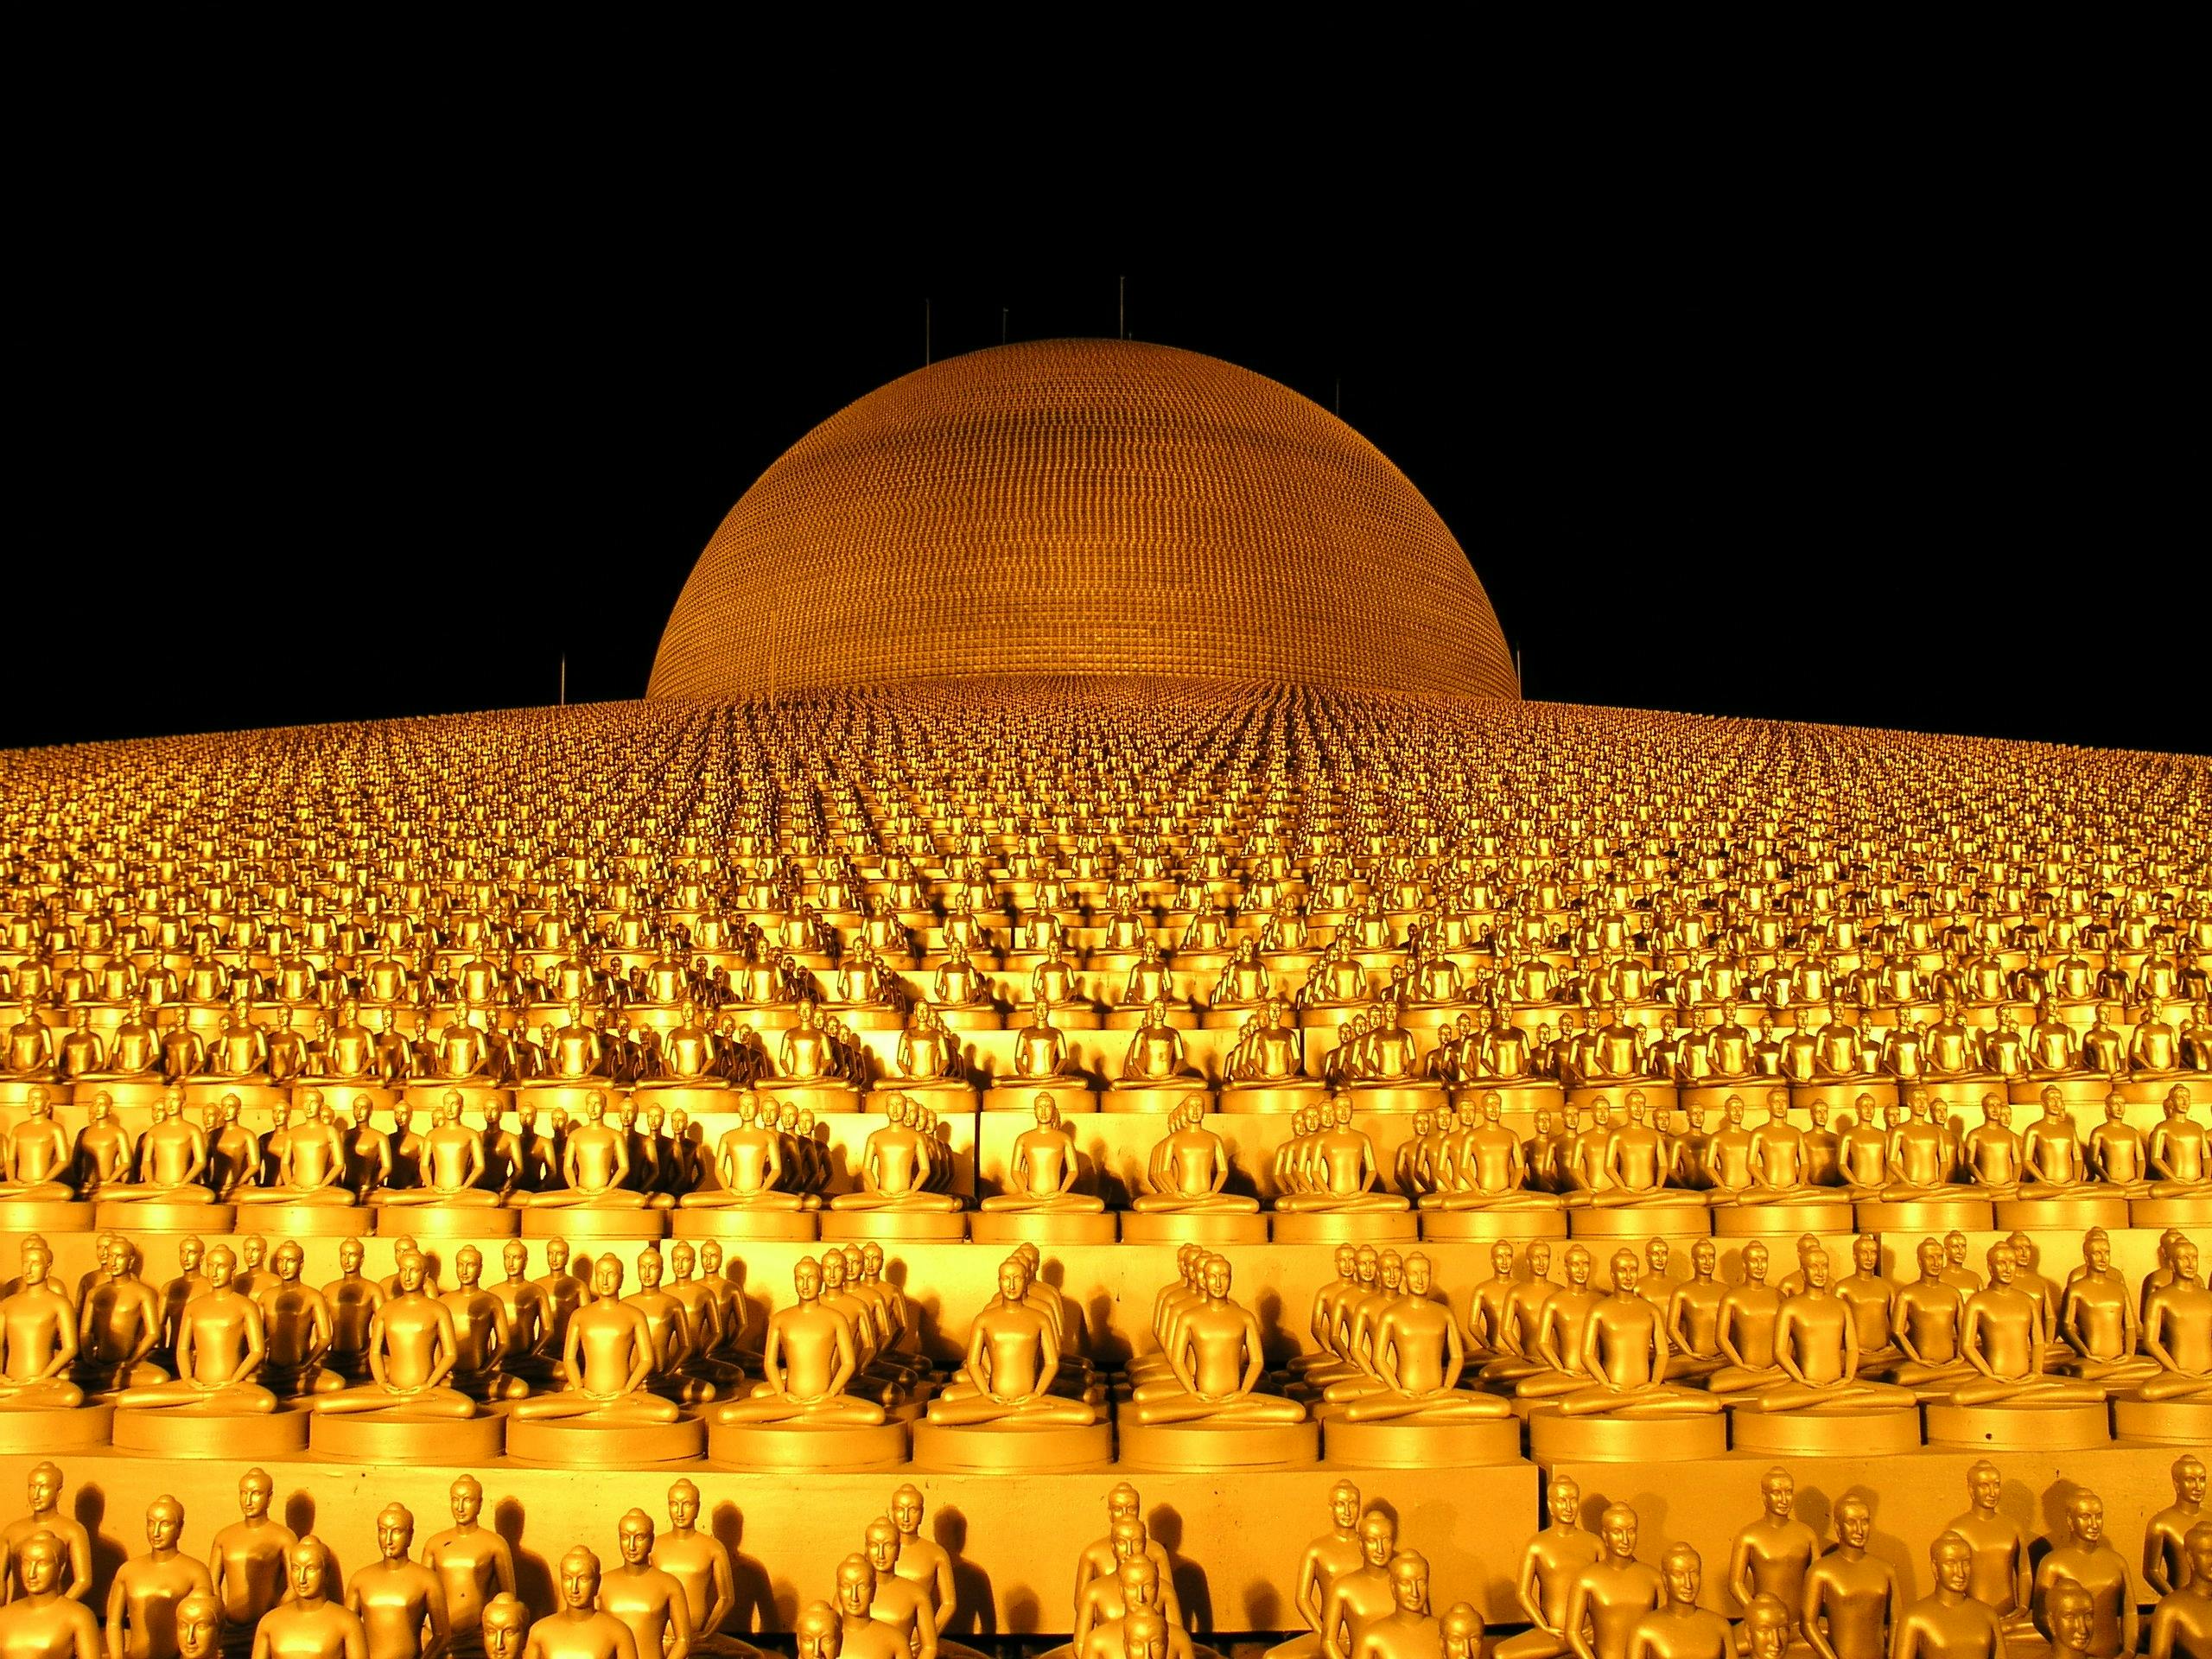 gold colored buddhas dome building